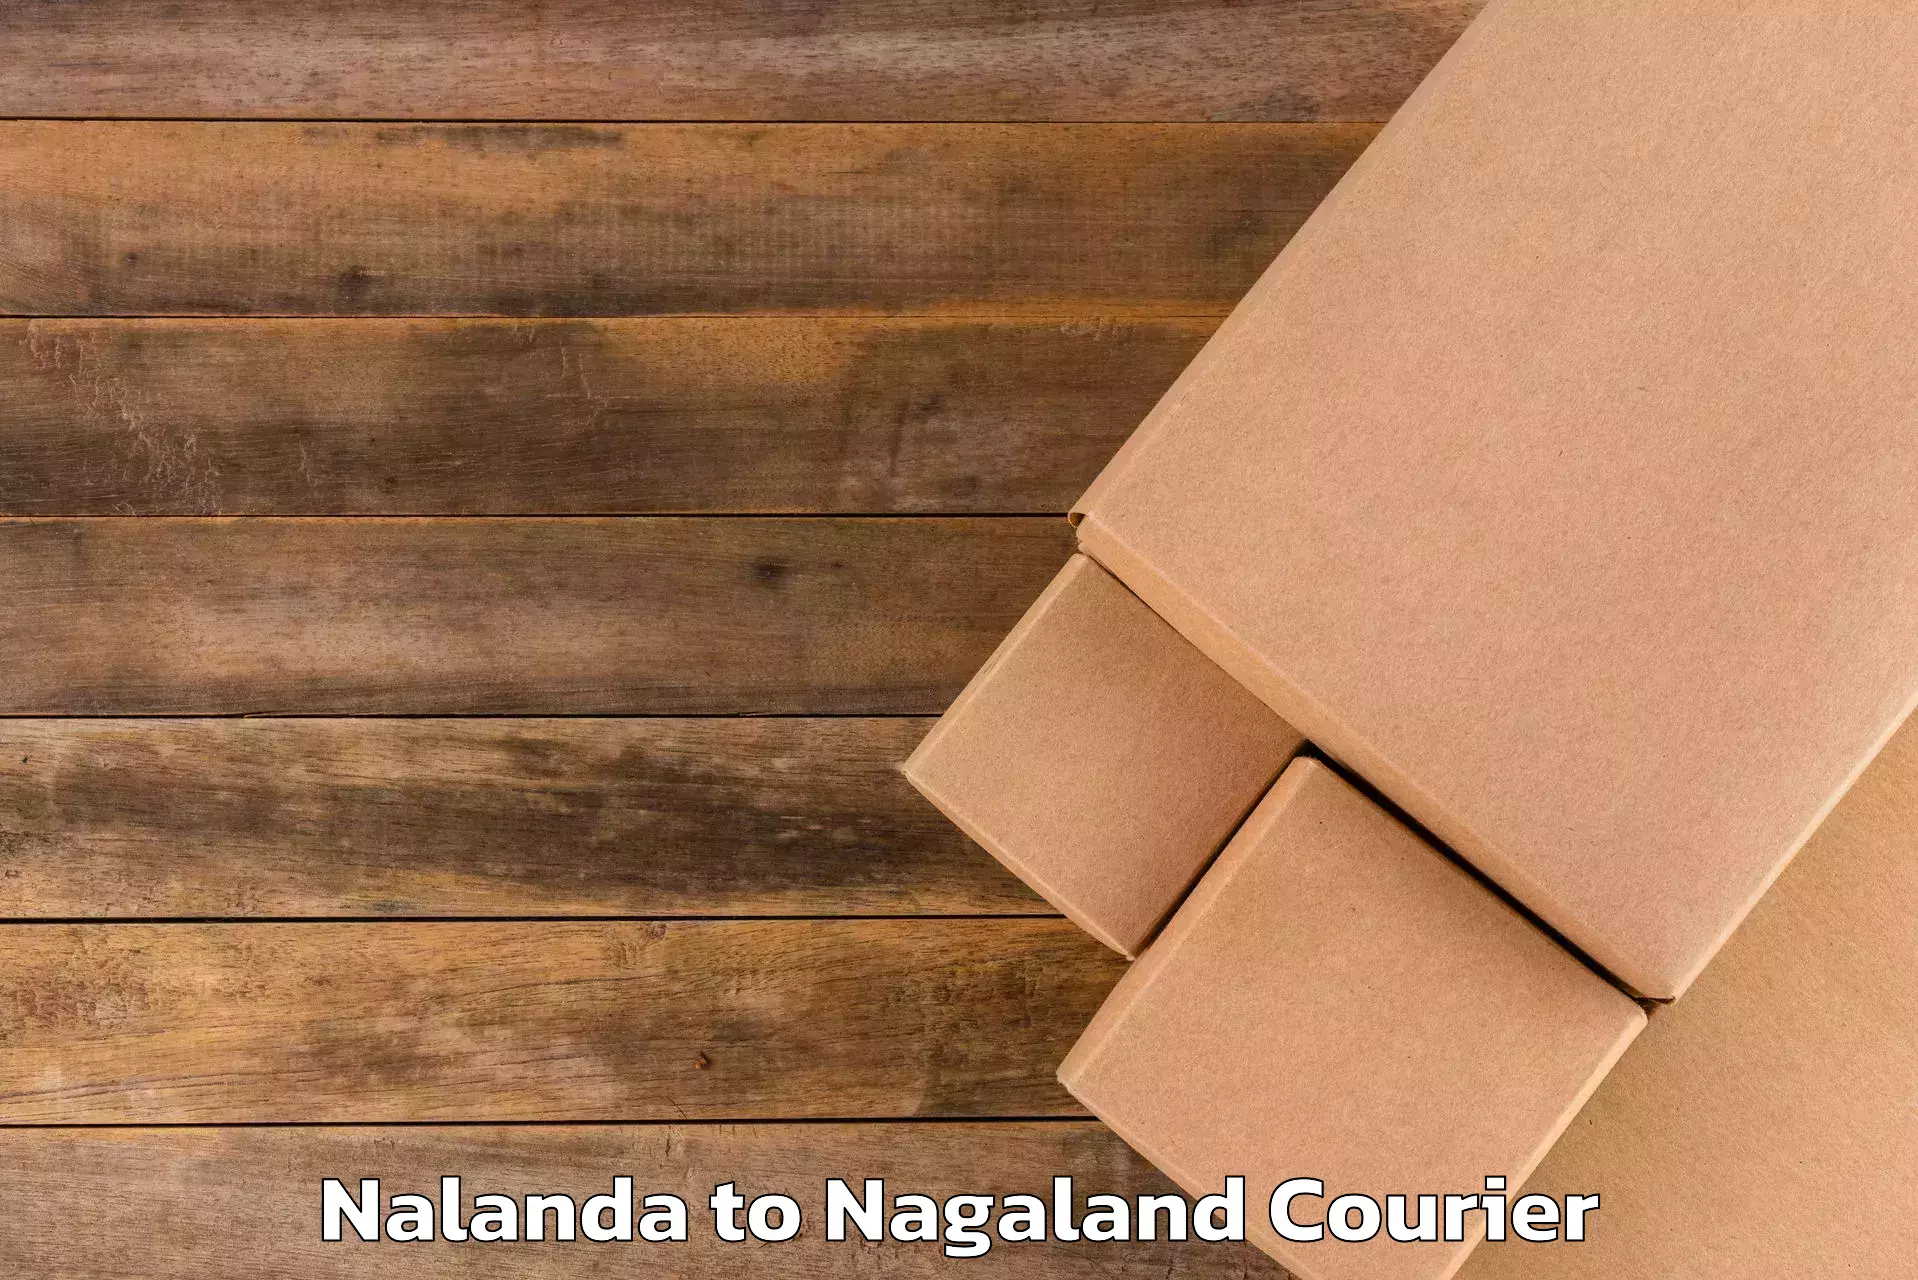 Baggage delivery technology in Nalanda to Dimapur